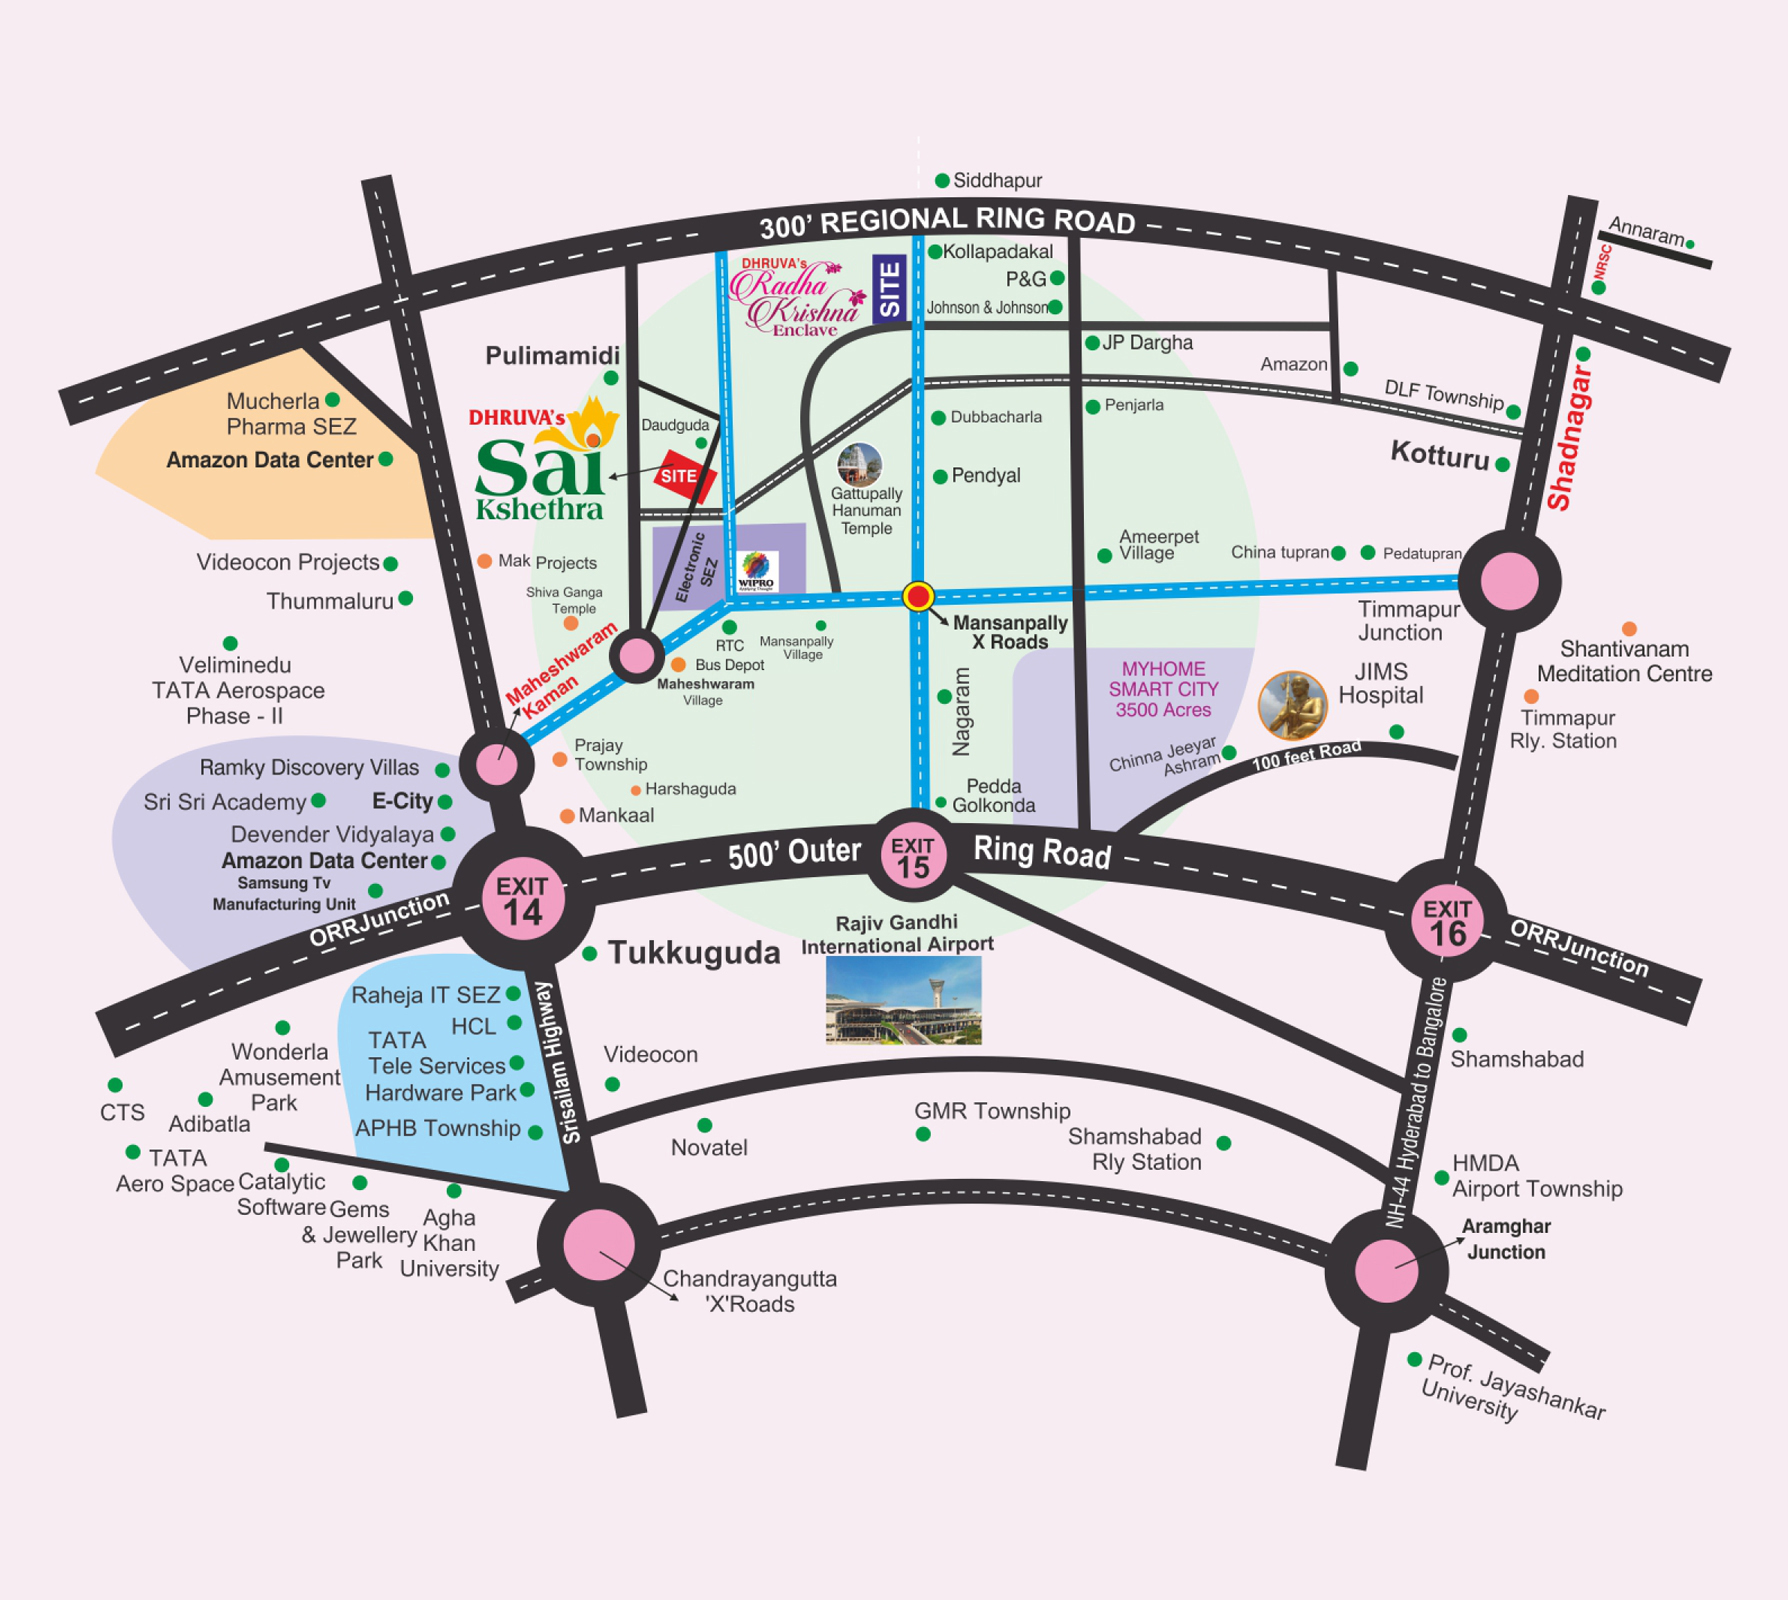 Hyderabad Metro Blue Line - Route Map, Timings, Stations, Extension and More